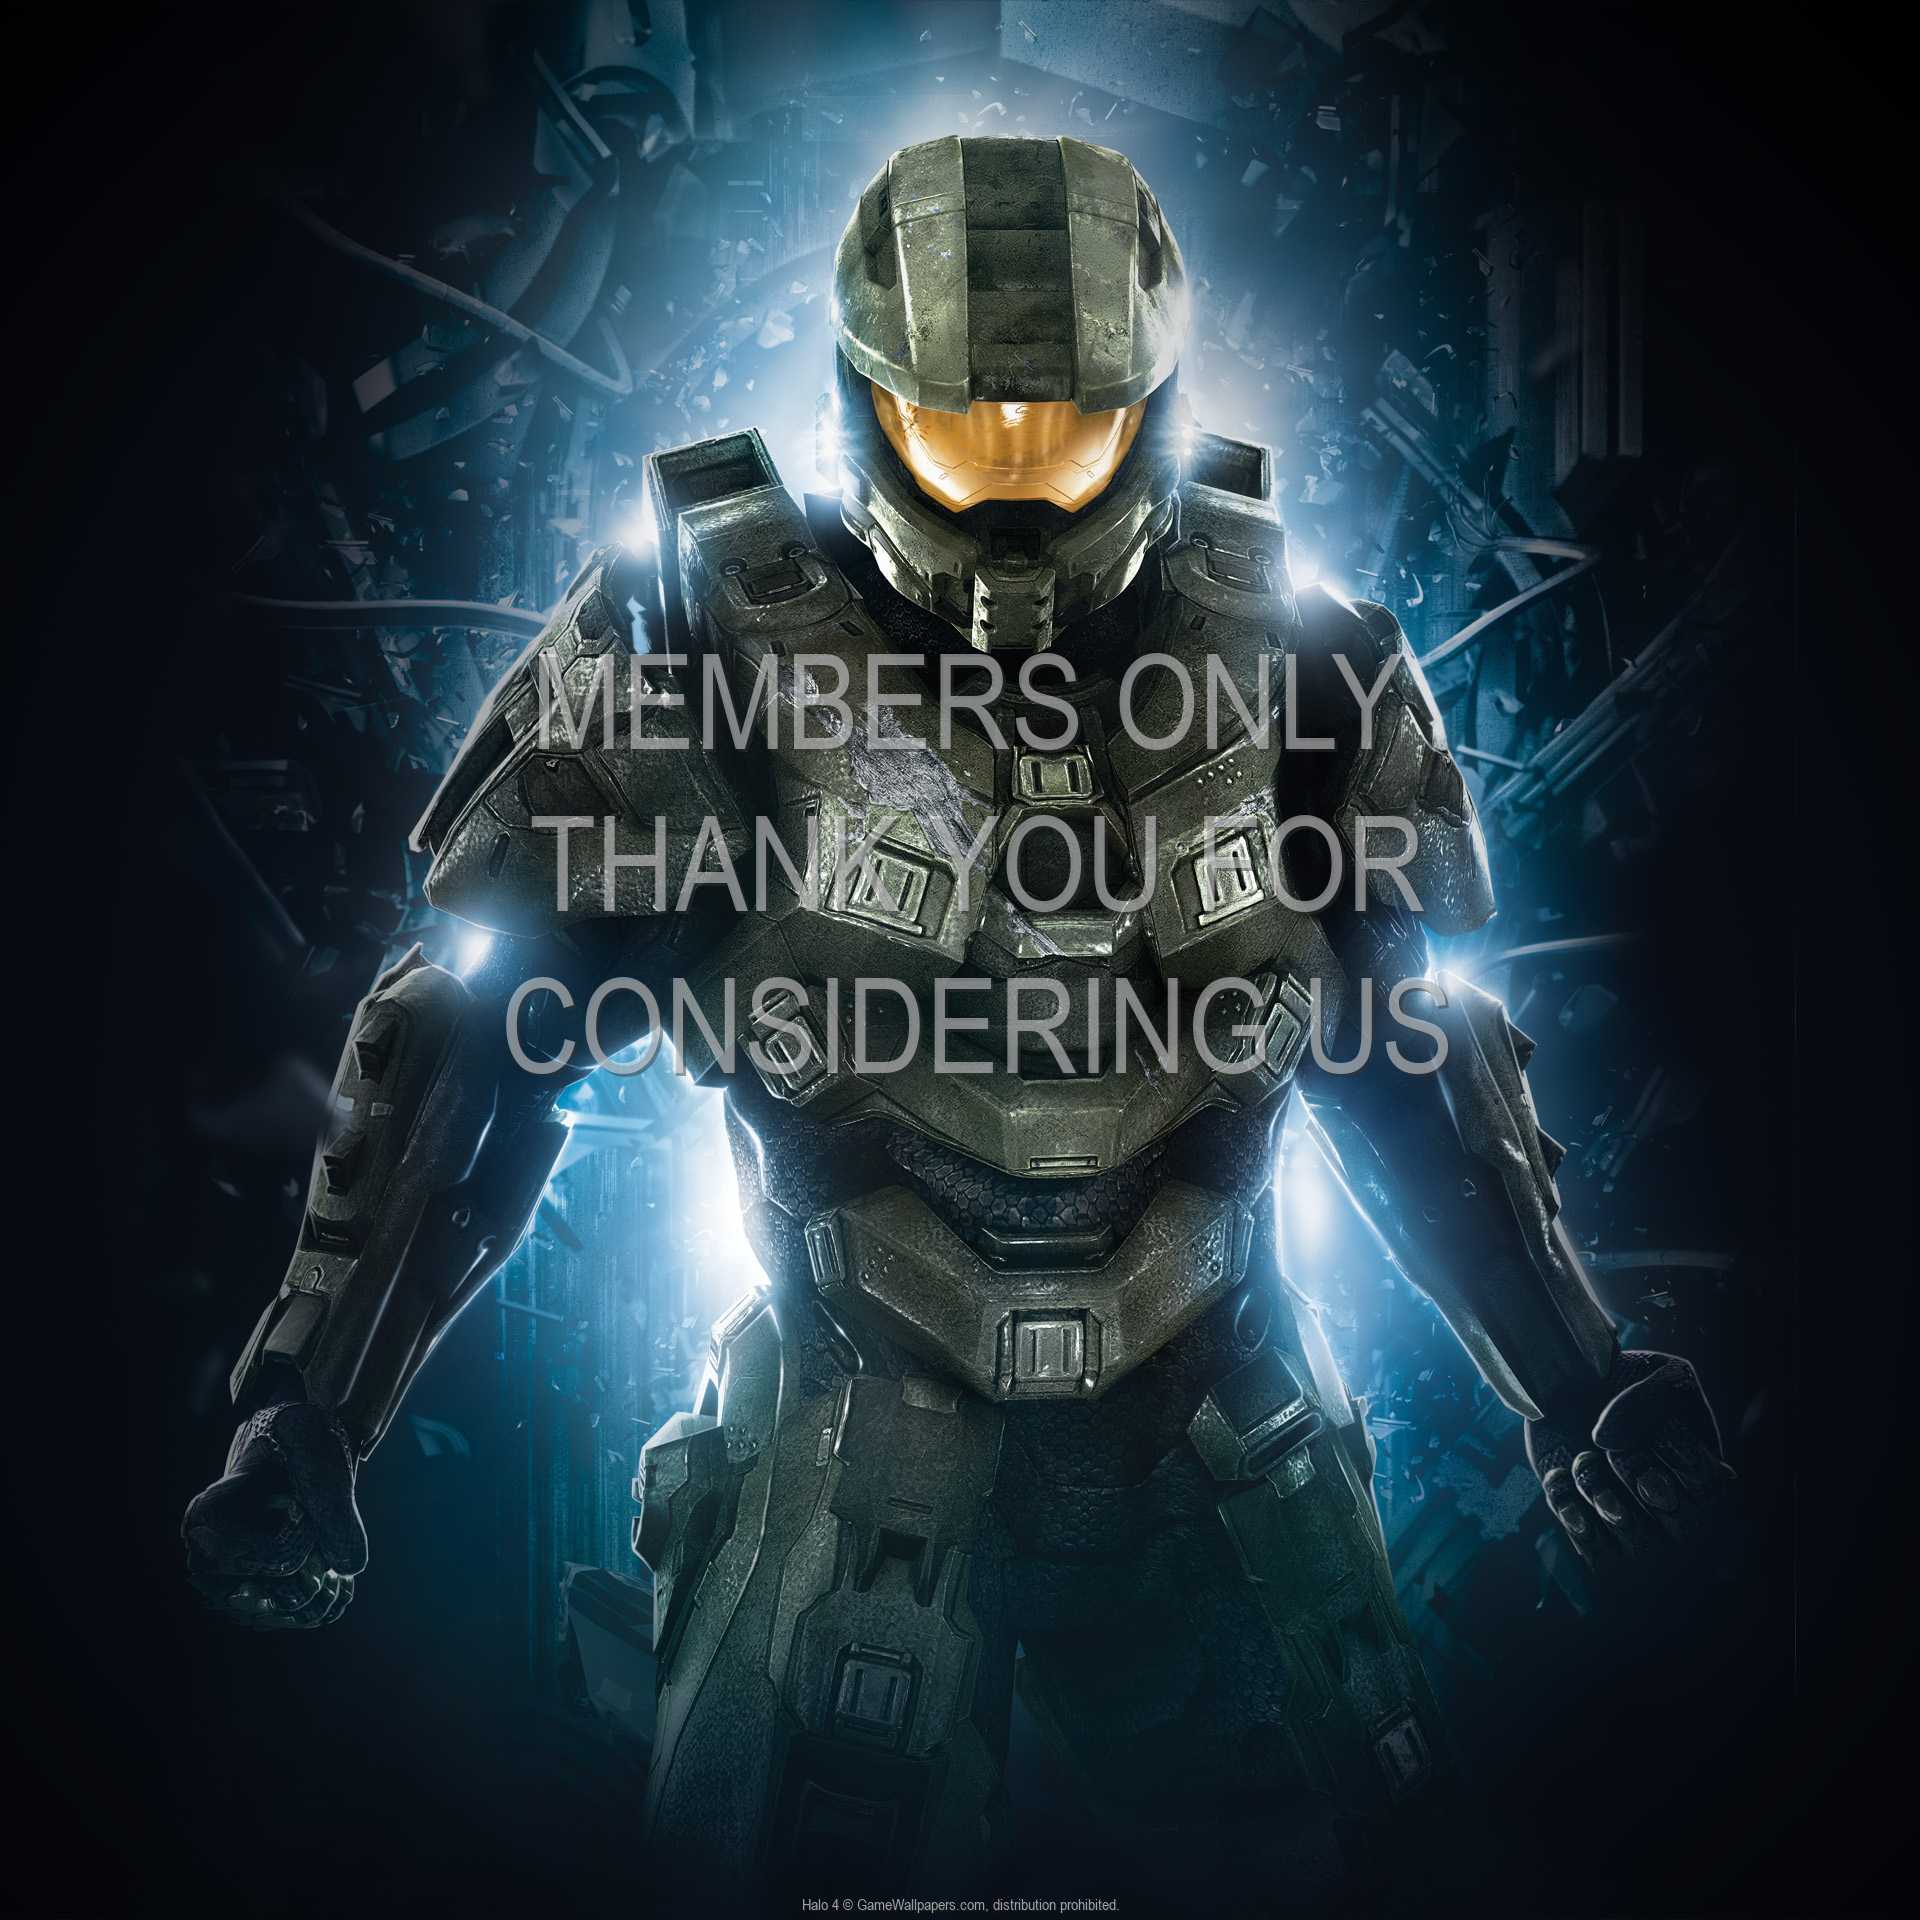 Halo 4 1080p%20Horizontal Mobile wallpaper or background 04